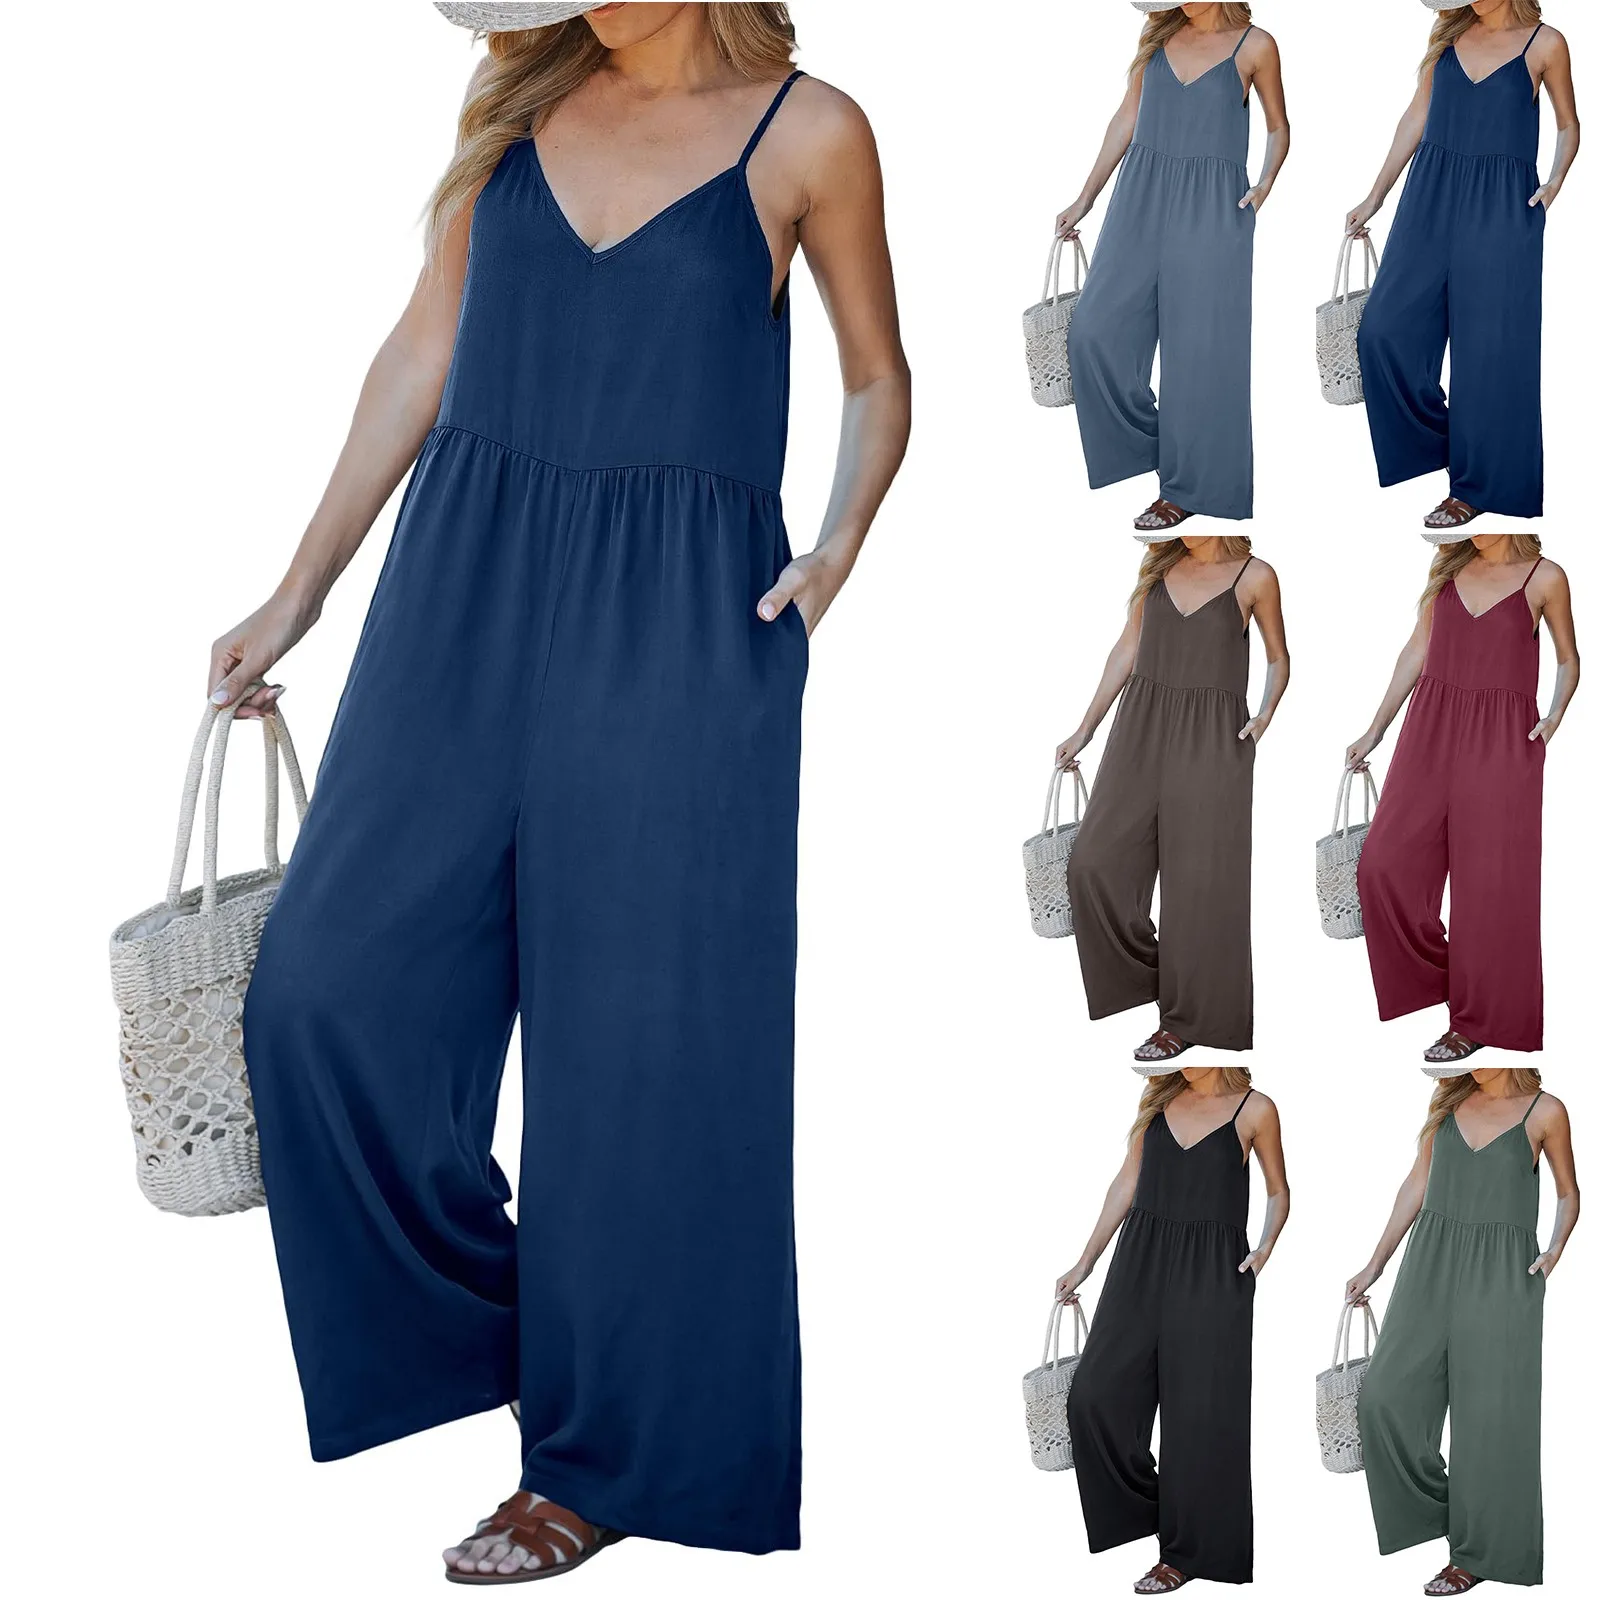 

Wide Leg Jumpsuits For Women Sleeveless Baggy Casual Summer Flowy Loose Spaghetti Strap Jumpsuit With Pockets monos largos